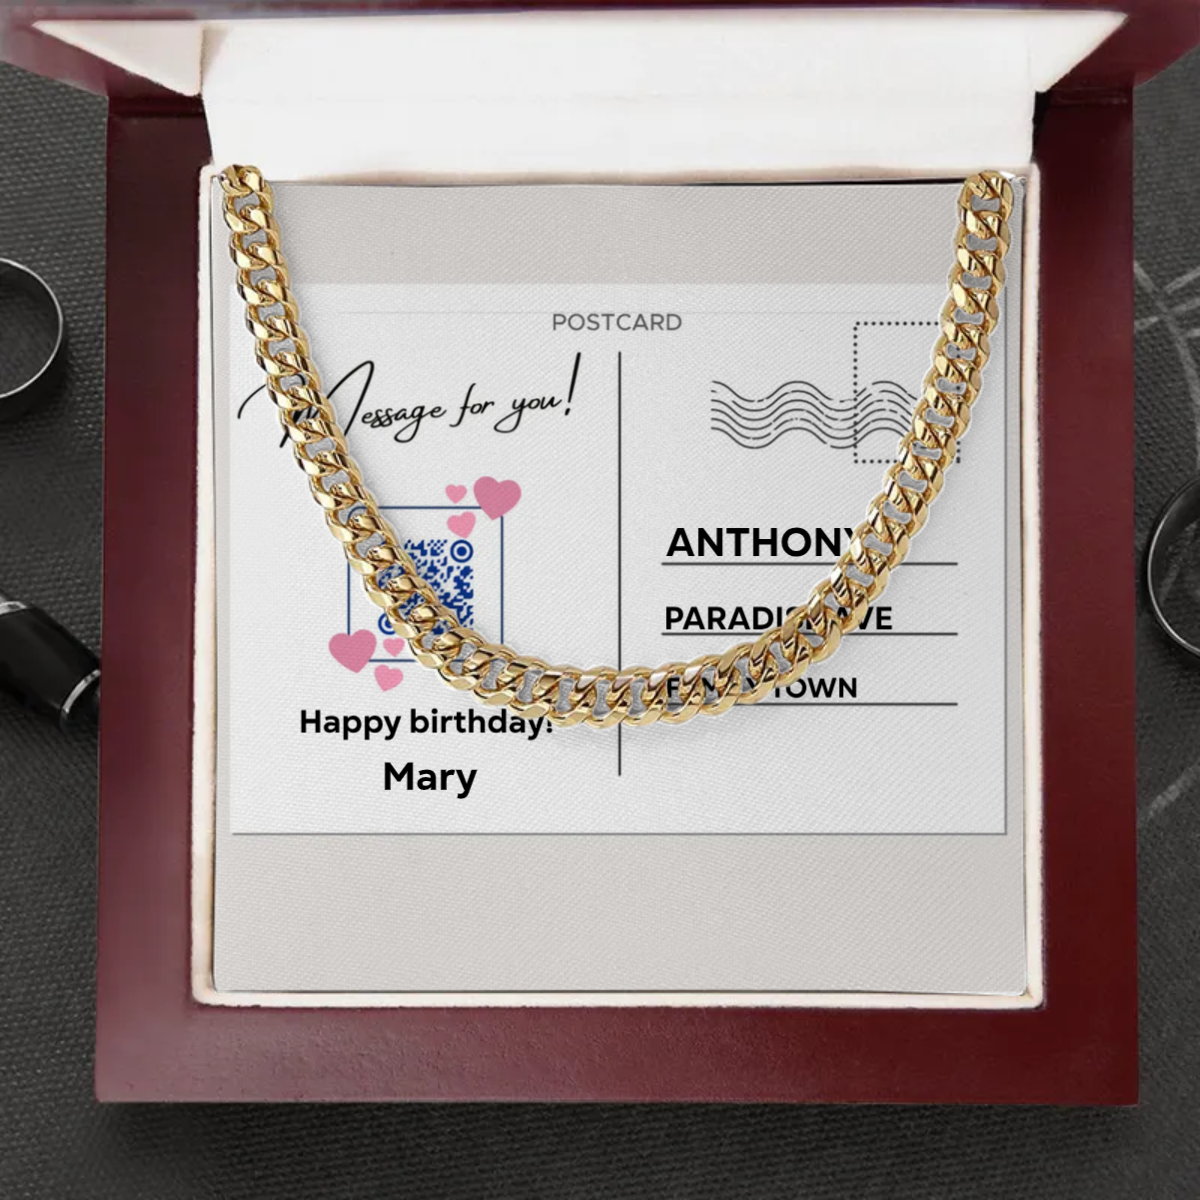 WE'RE HAVING A BABY! Hidden Message for Future Dads - Cuban Link Chain - Luxury Box